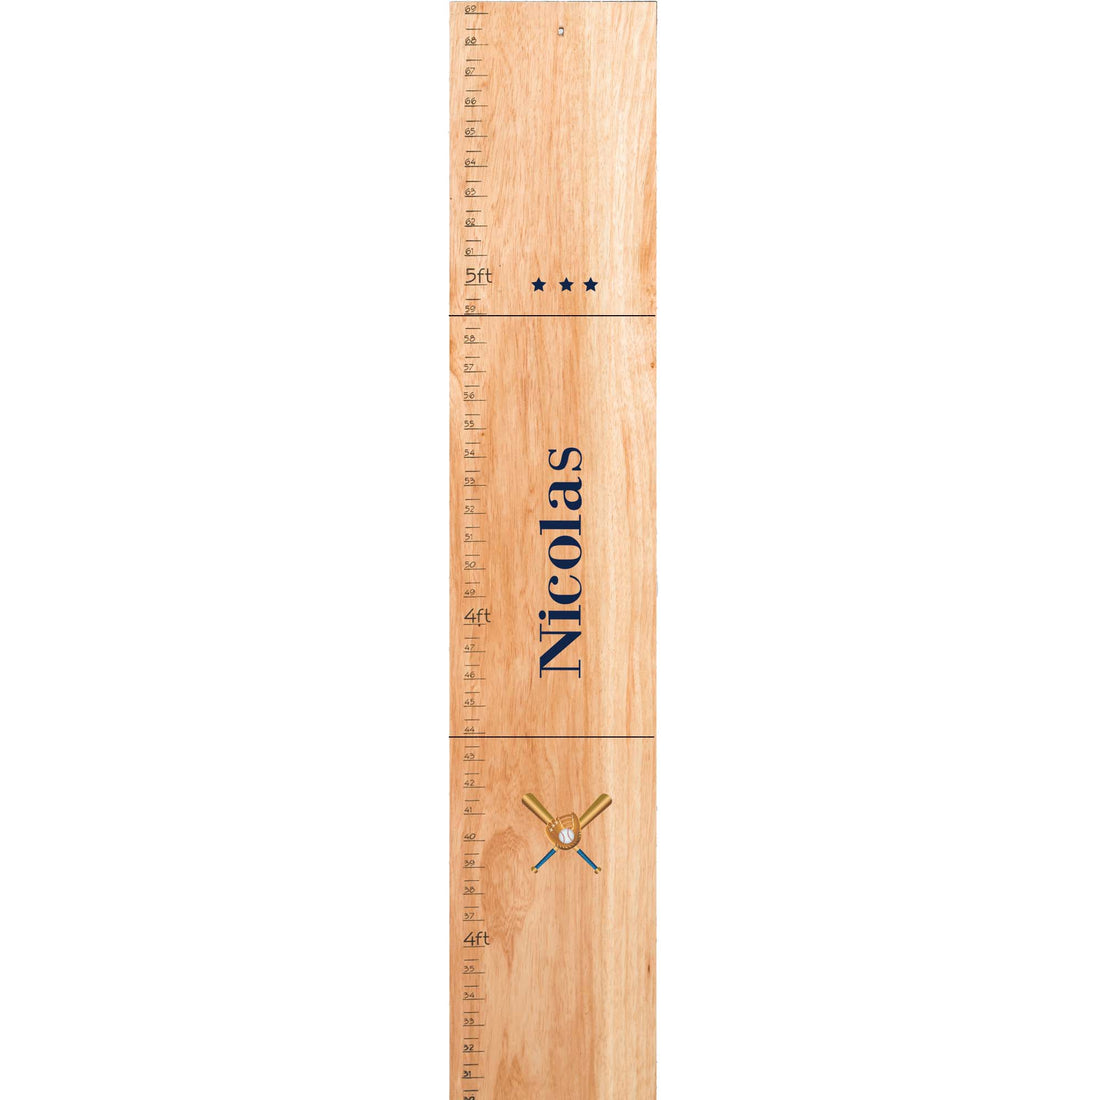 Personalized Natural Growth Chart With Baseball Design